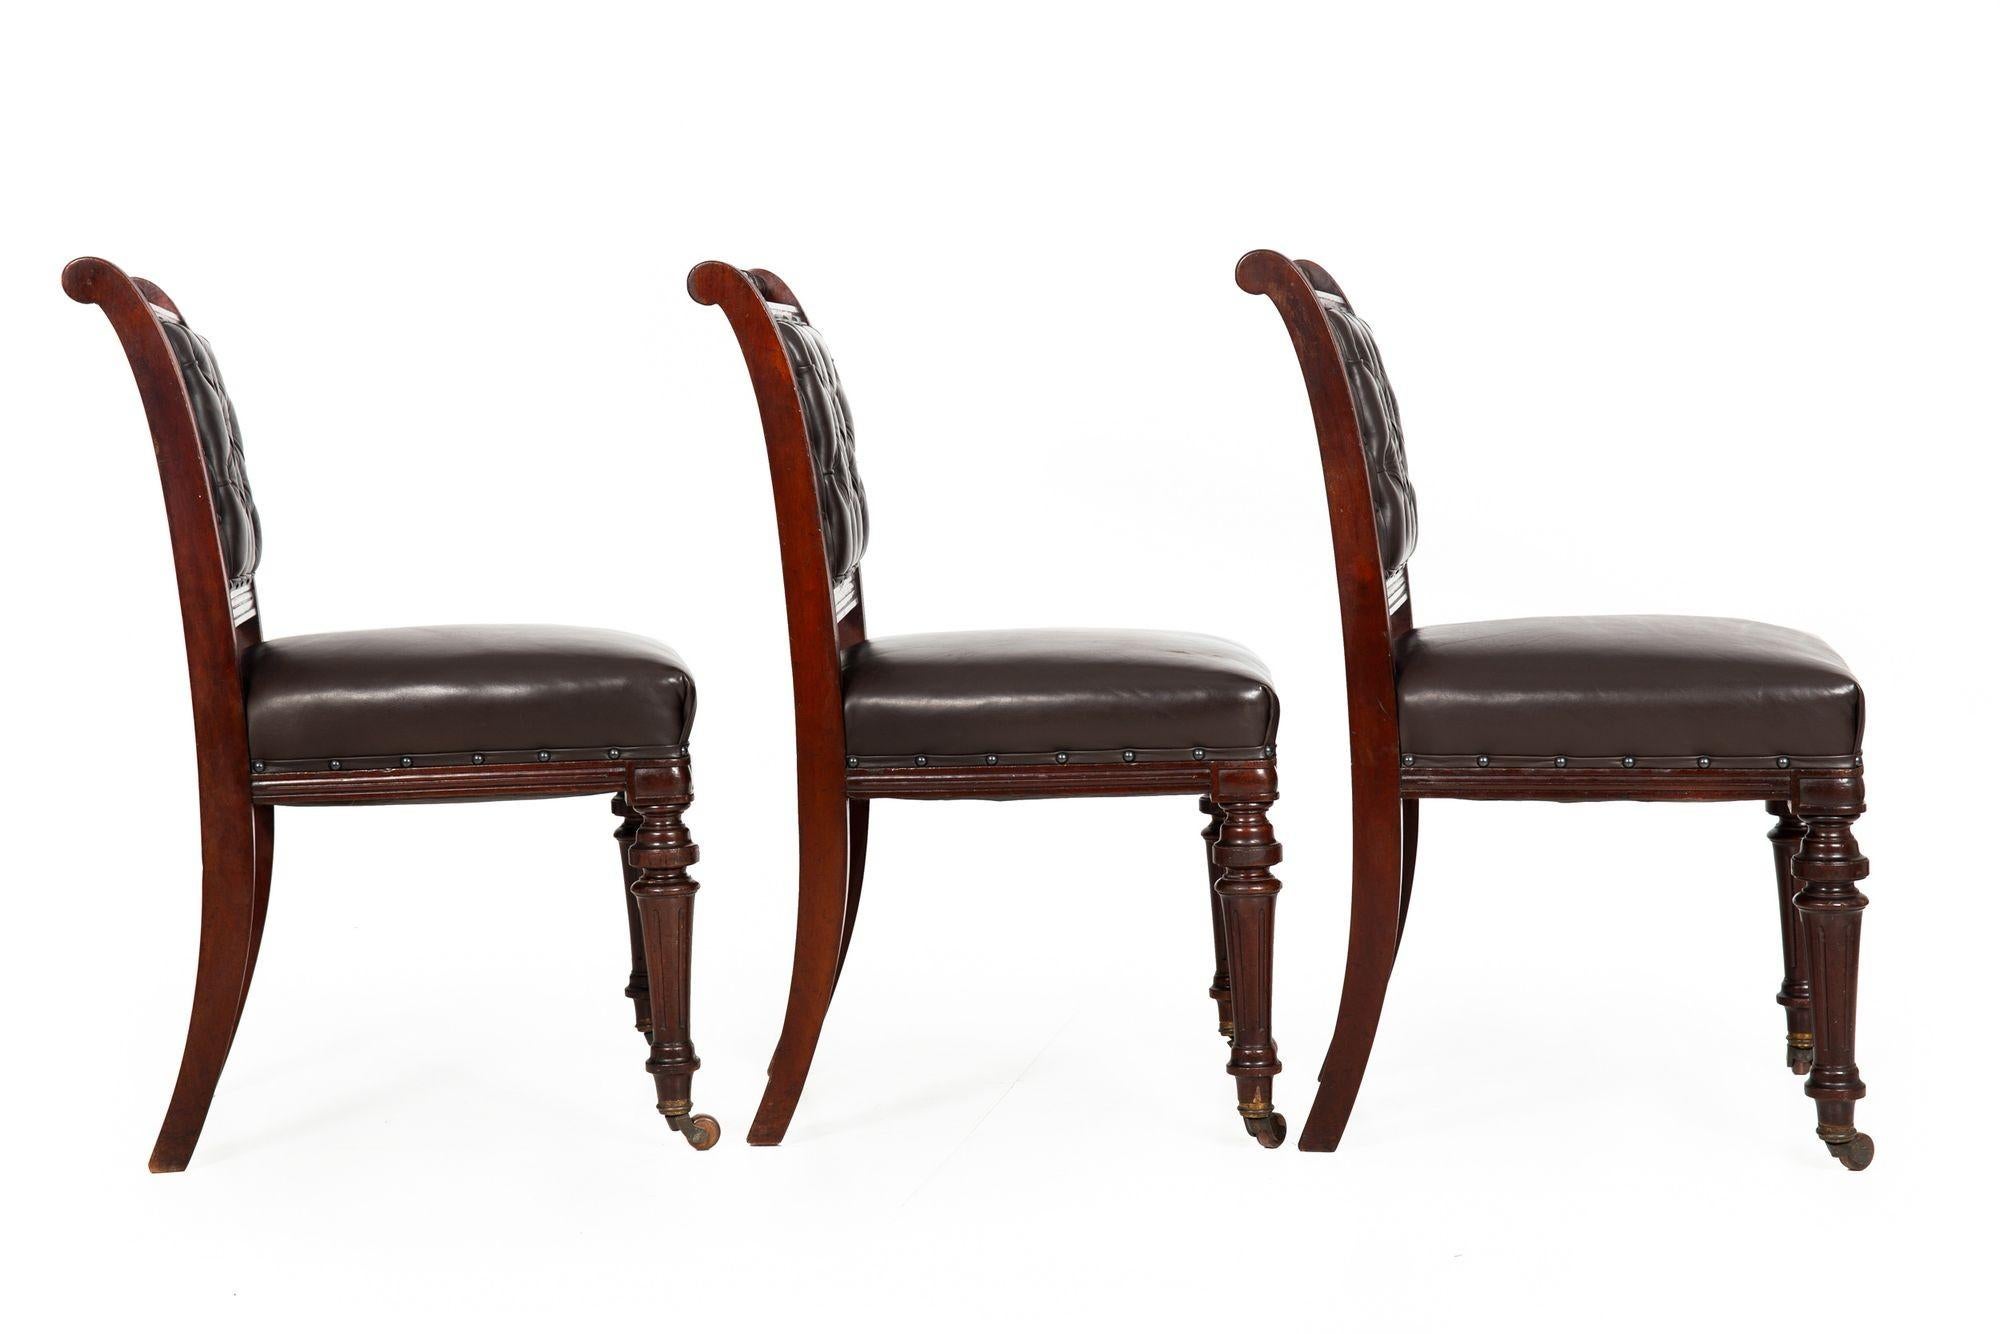 Set of 6 English Antique Mahogany and Leather Dining Chairs, 19th Century For Sale 4